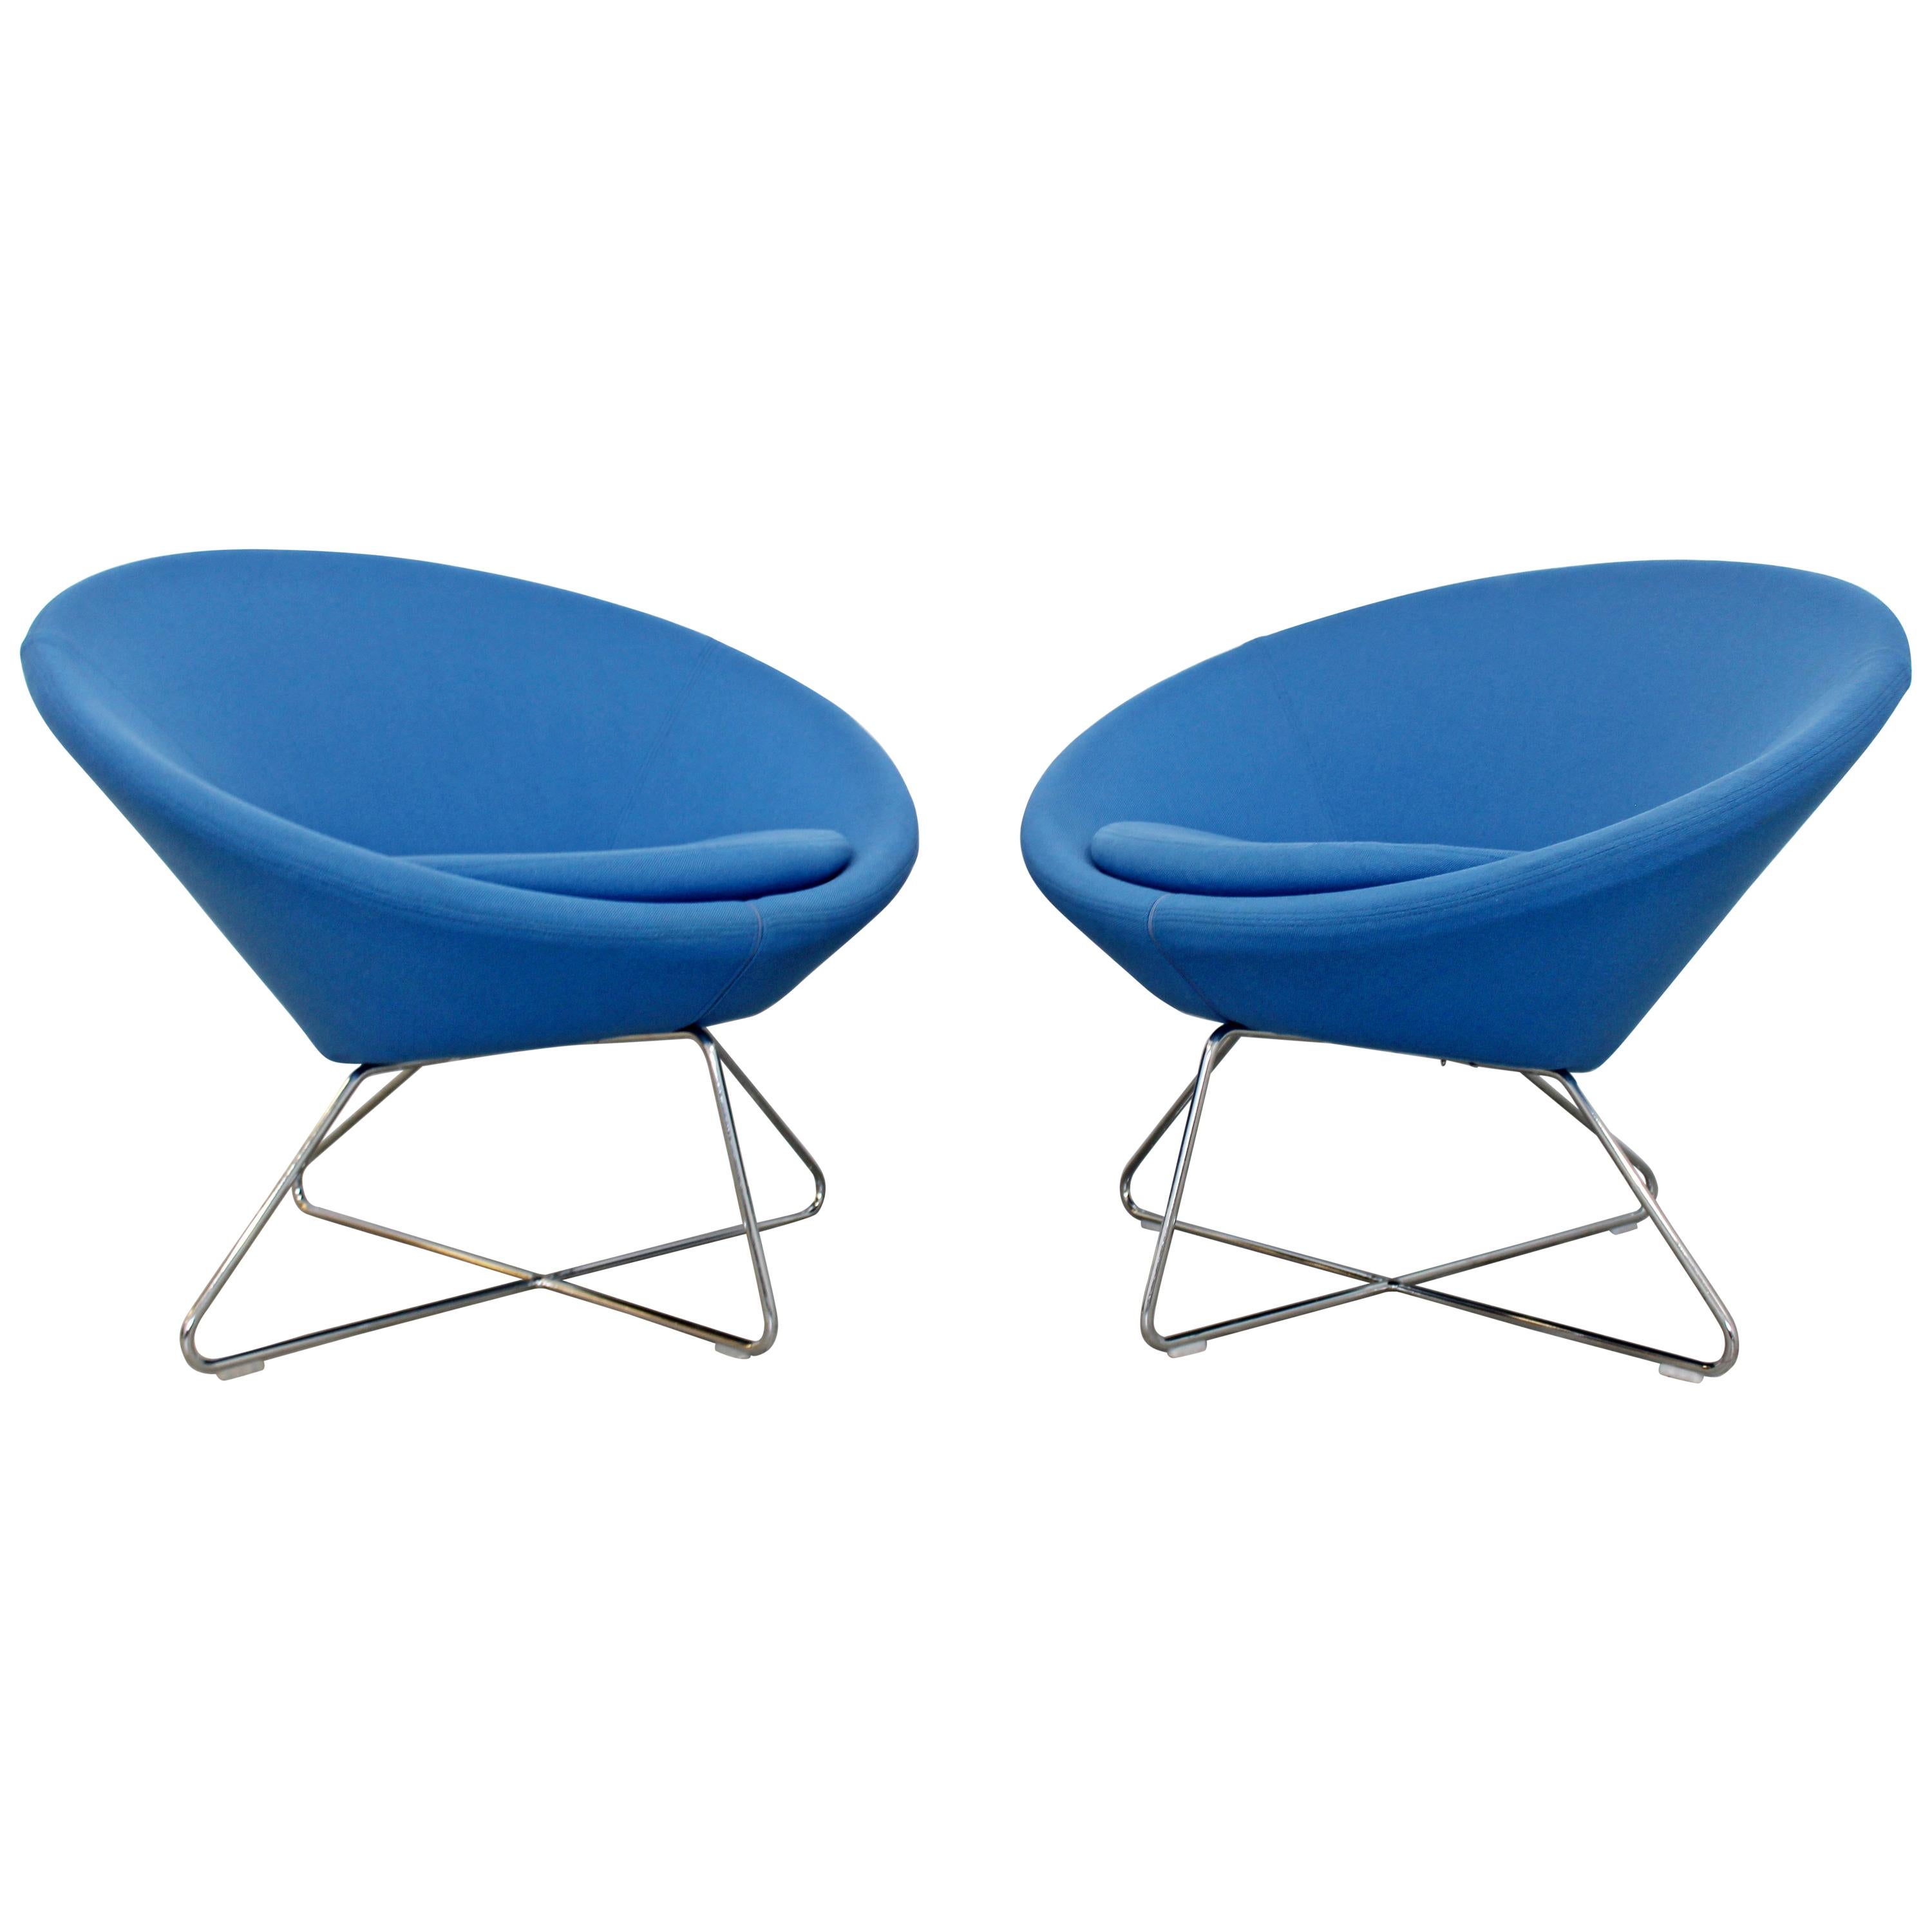 Contemporary Modernist Allermuir Pair of Blue Lounge Accent Chairs Chrome Bases